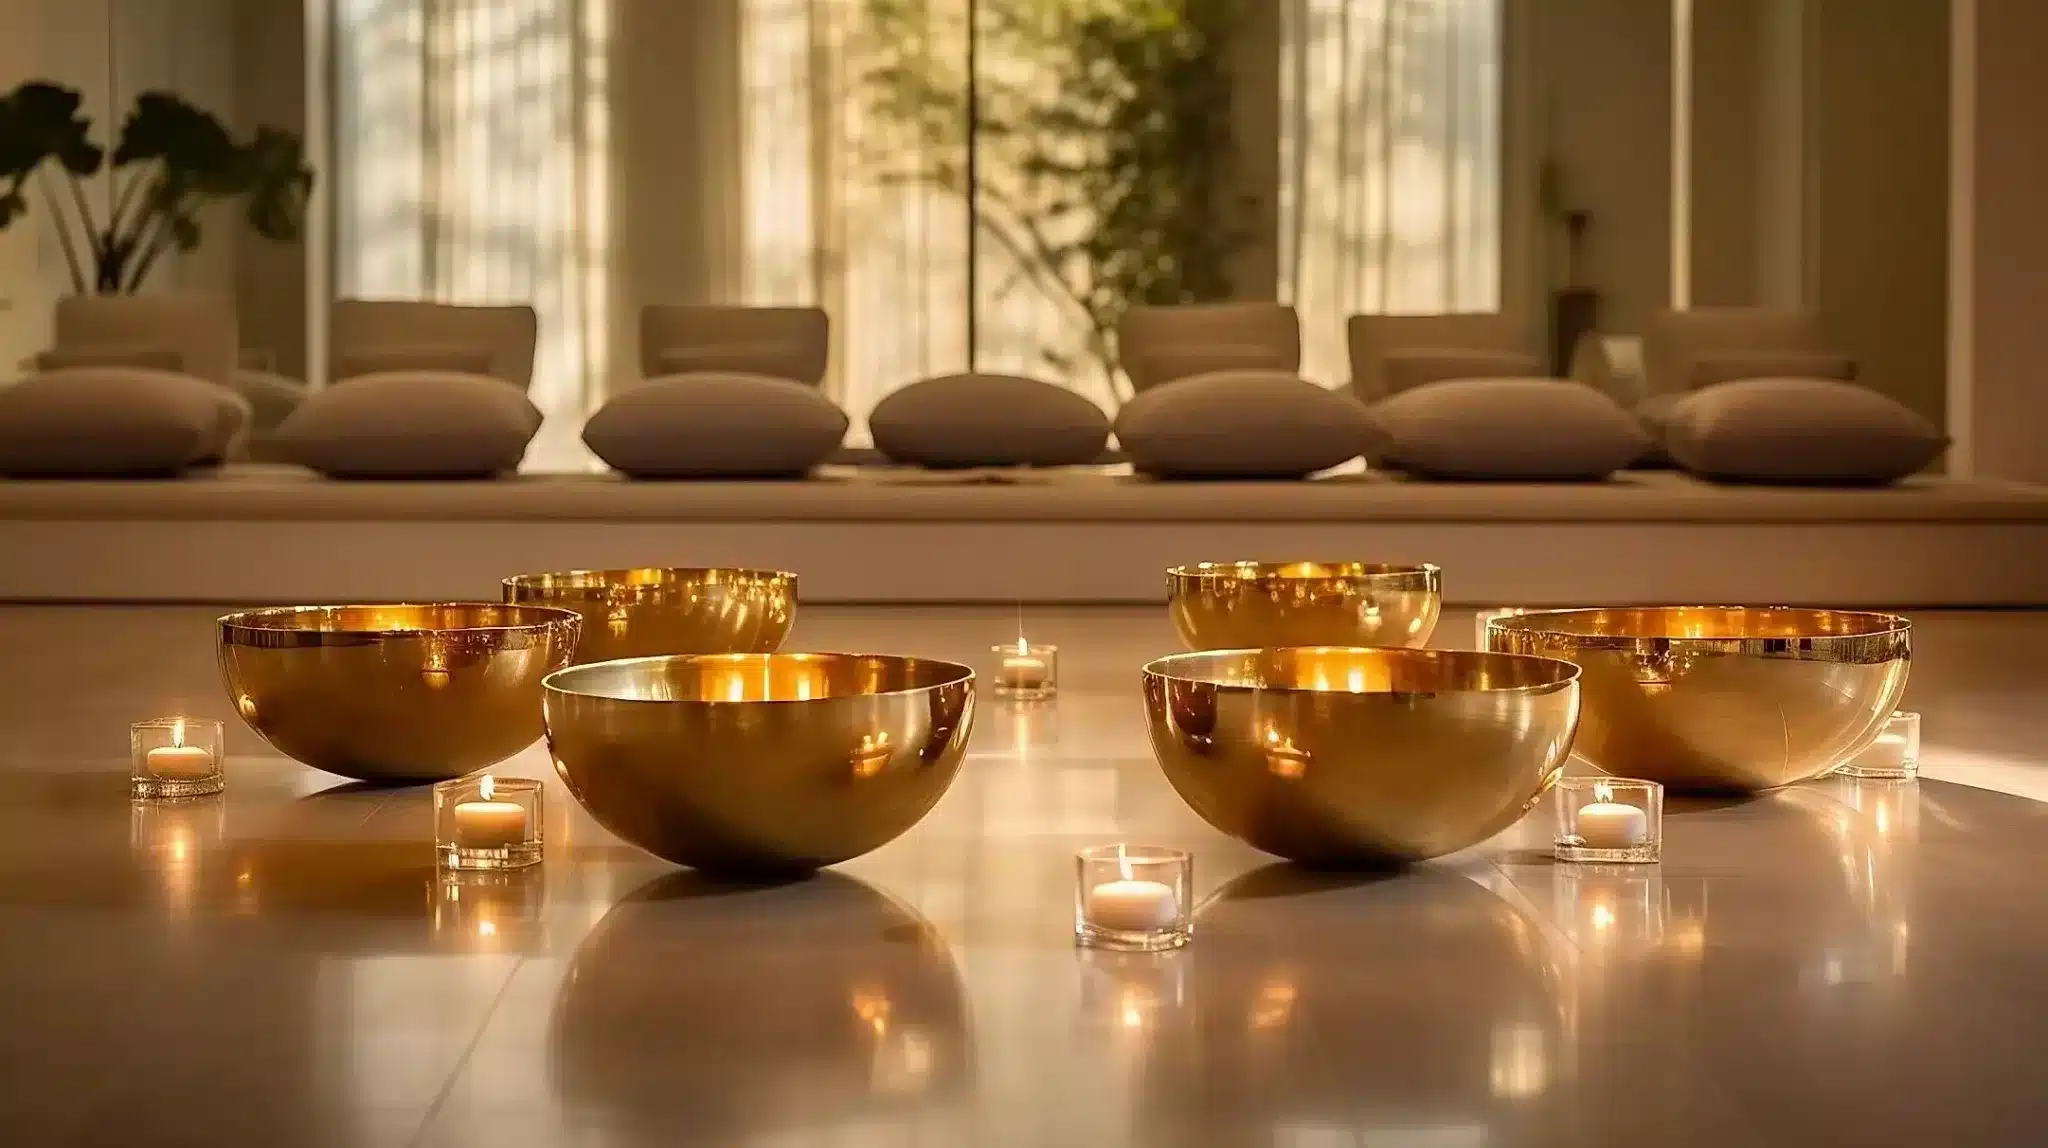 A tranquil meditation space adorned candles transformed